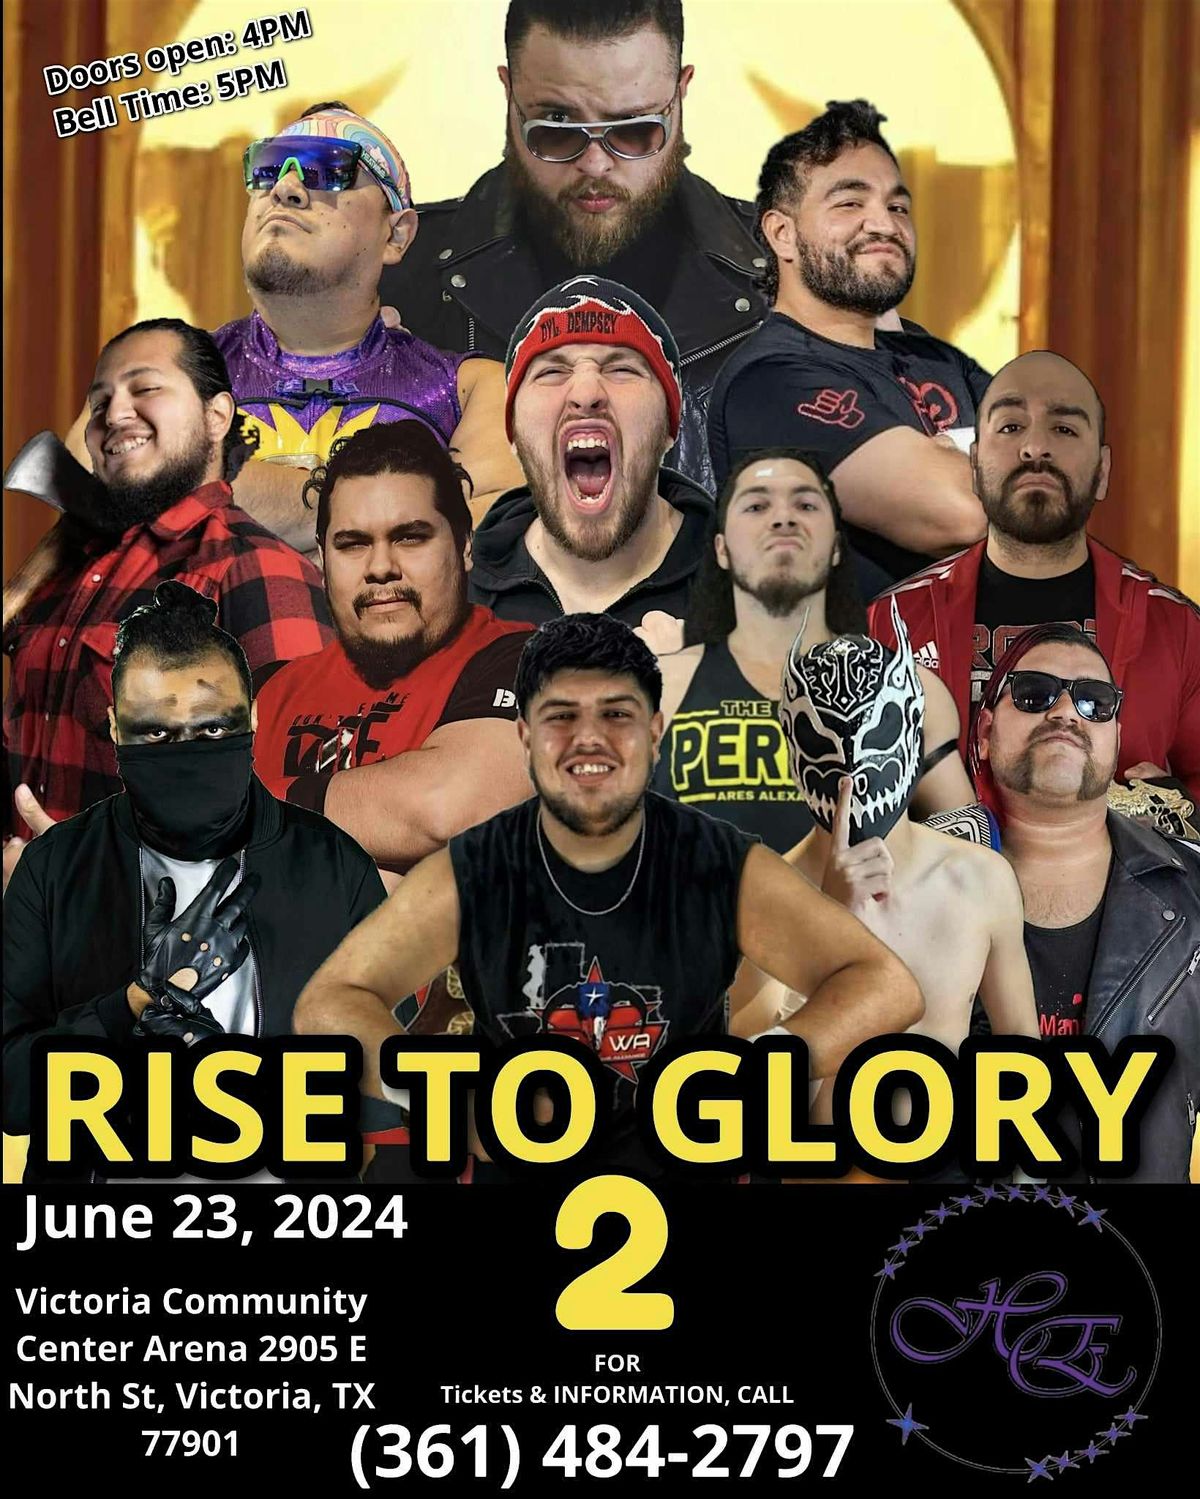 RISE TO GLORY 2